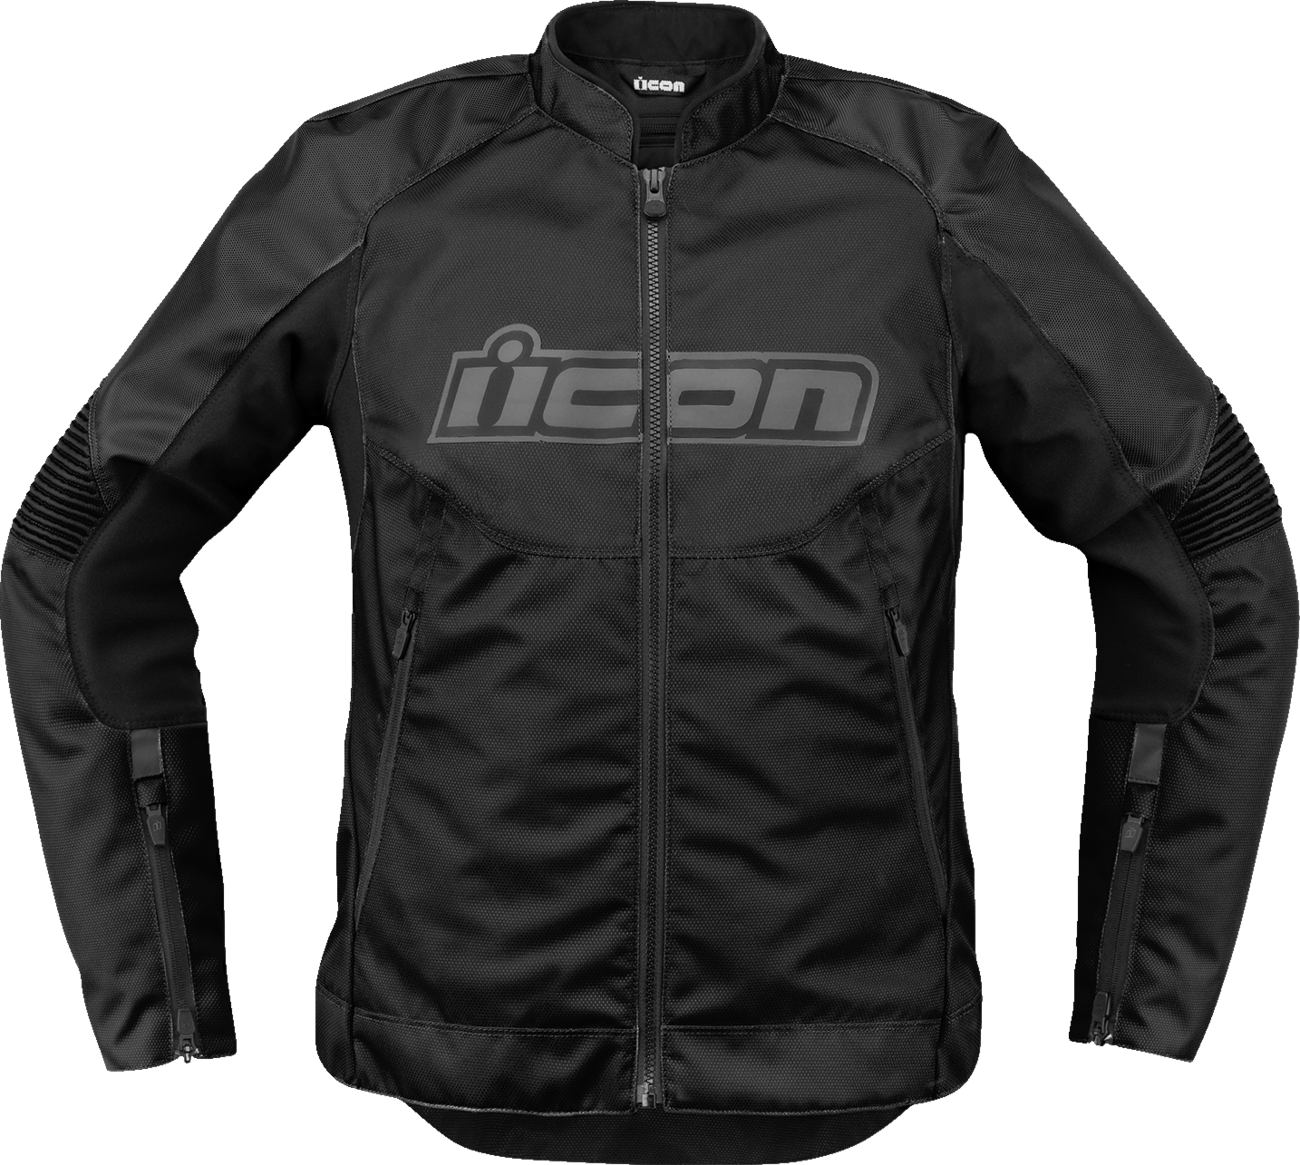 ICON Women's Overlord3™ CE Jacket - Black - XS 2822-1591